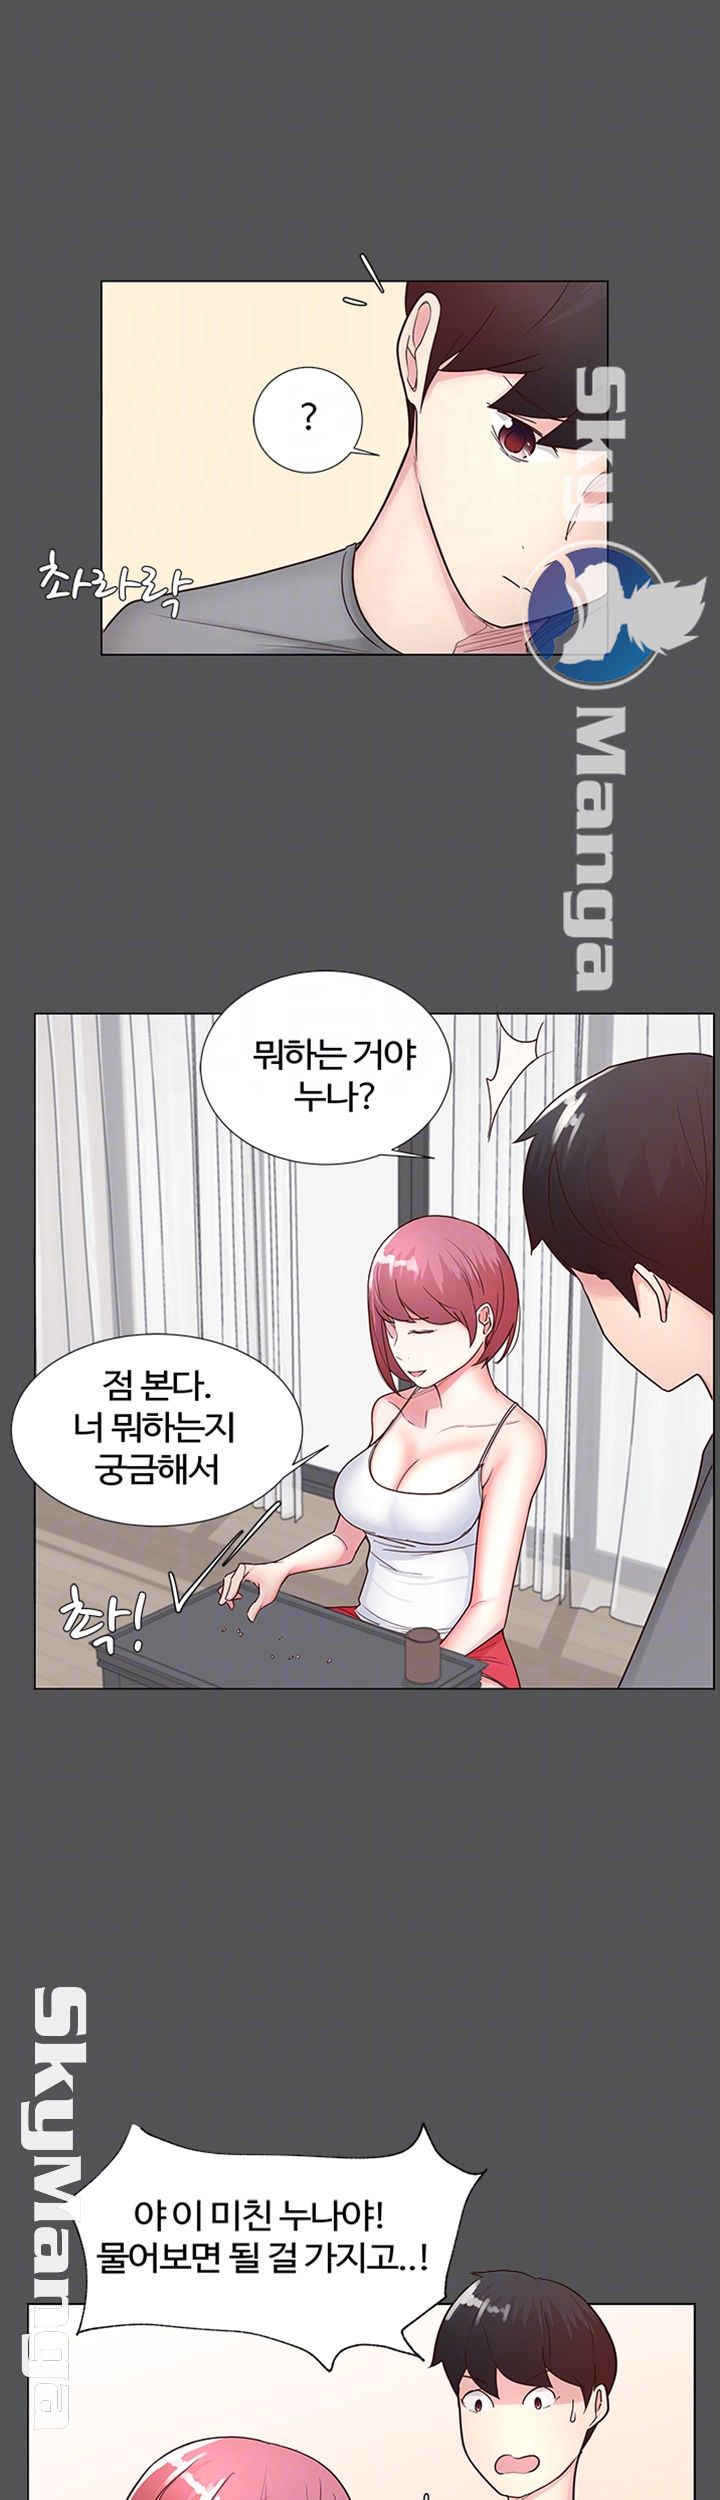 Preview Relashionships Raw - Chapter 9 Page 6